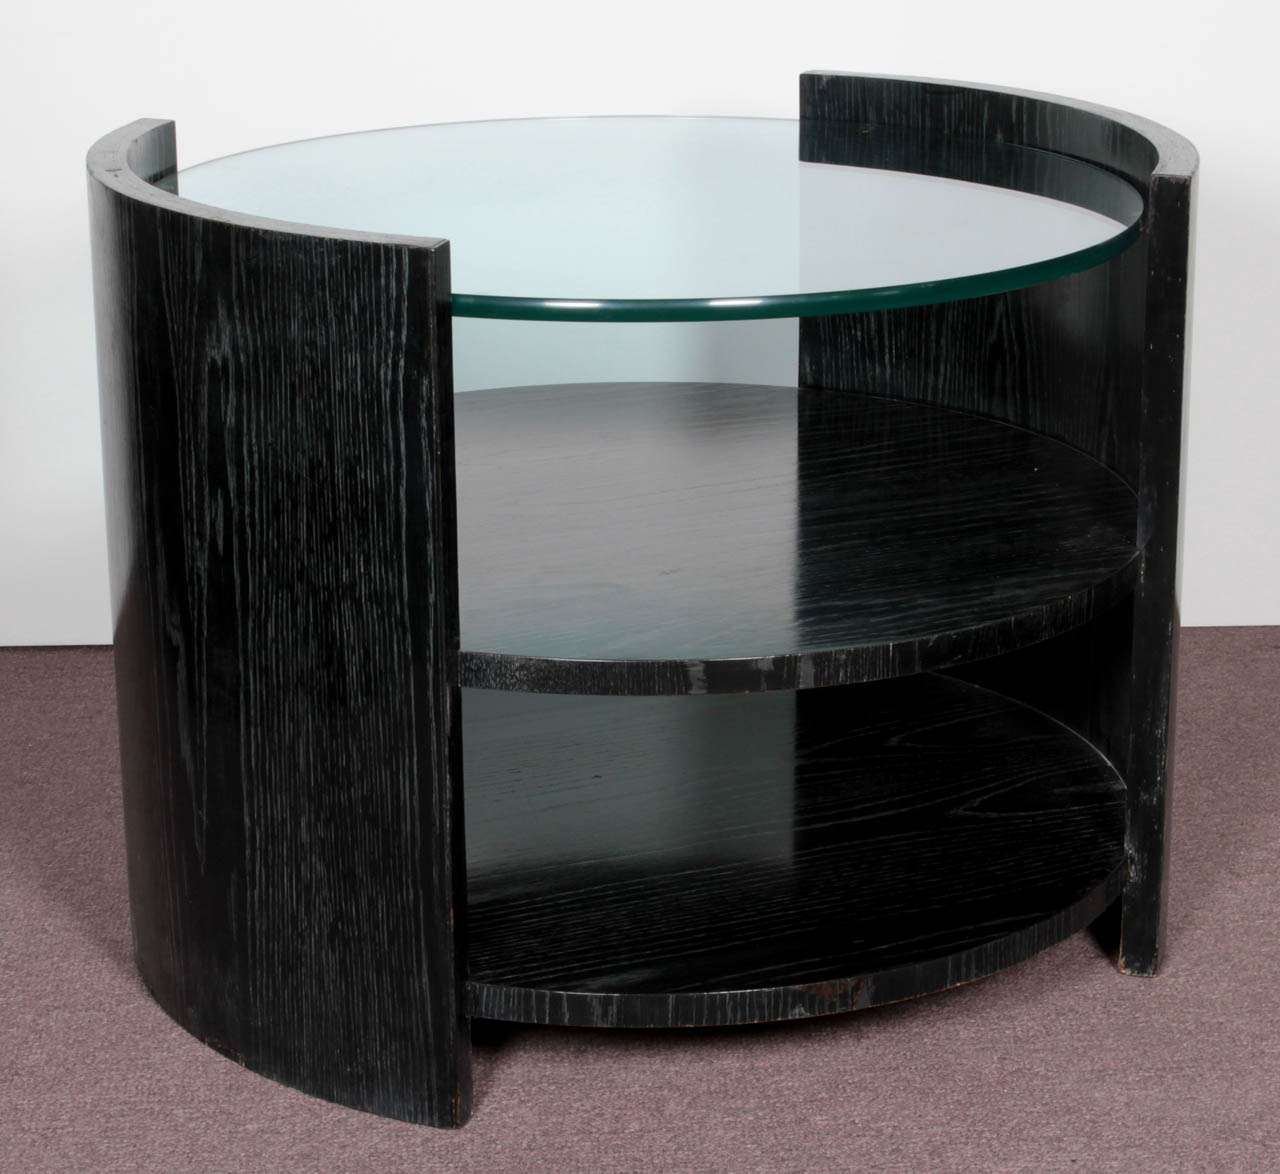 A large limed, blackened oak barrel side table by Jay Spectre of eclipse design, tiered with three practical surfaces and topped by a heavy 5/8” thick circular glass. Store your newspapers/ magazines, your trinkets or keep it clean and simple on